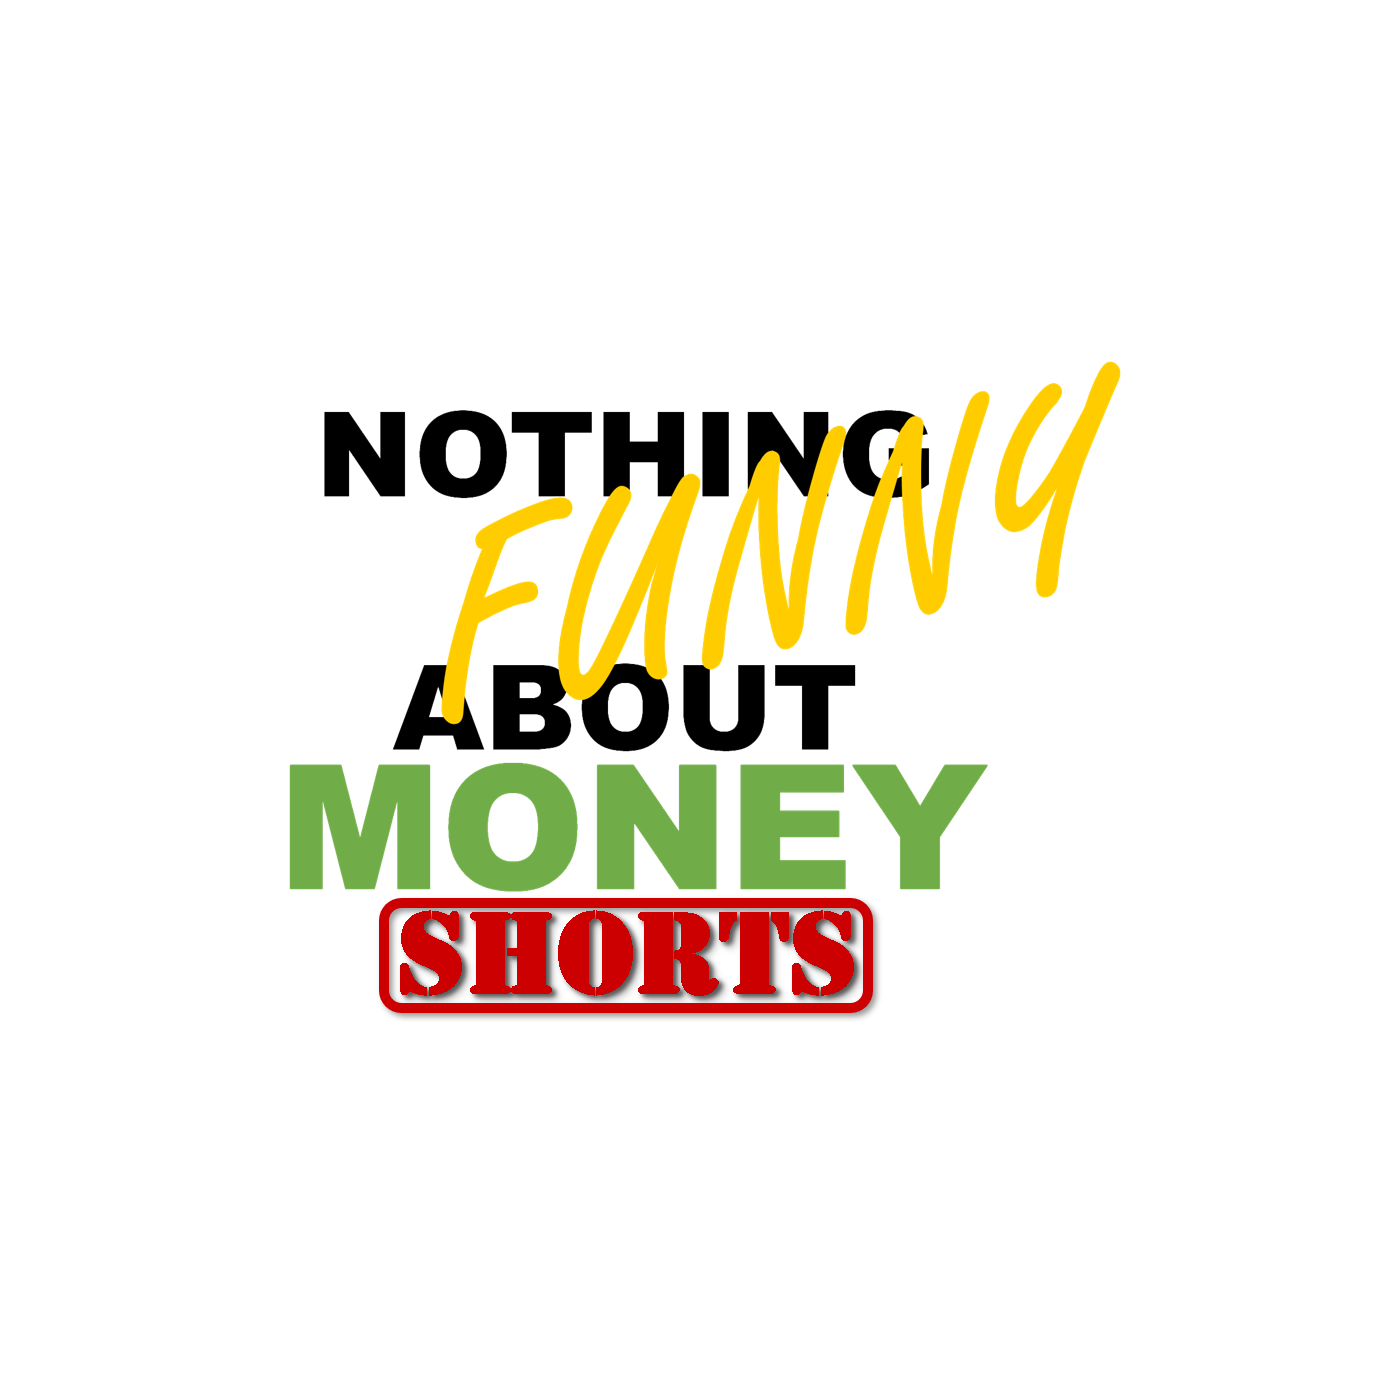 Nothing Funny About Money (Shorts)